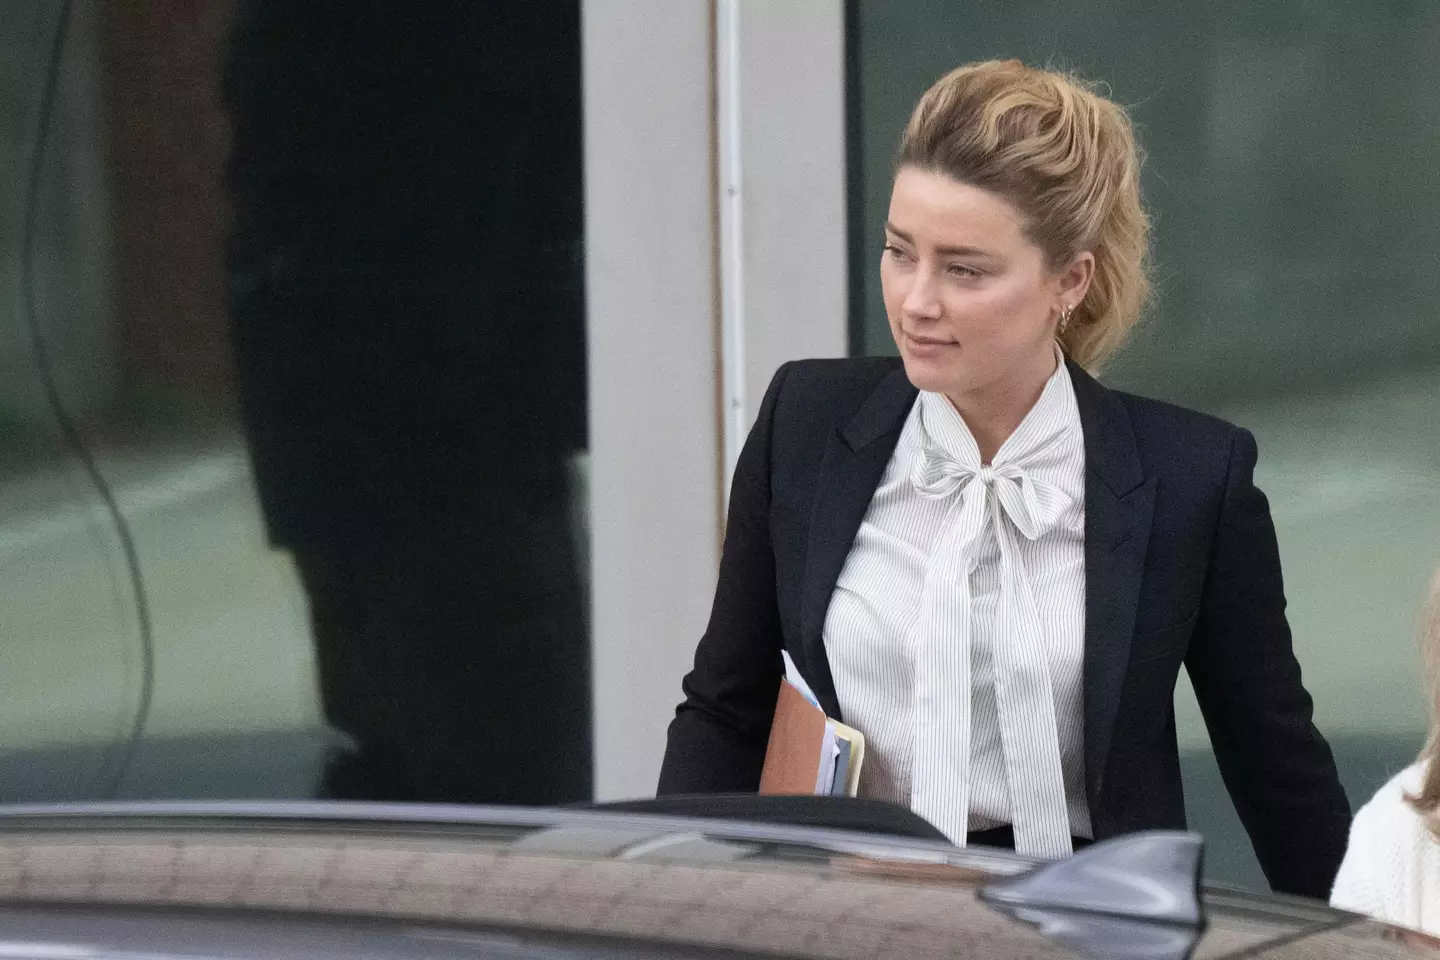 Amber Heard is being sued for $50 million by Depp.